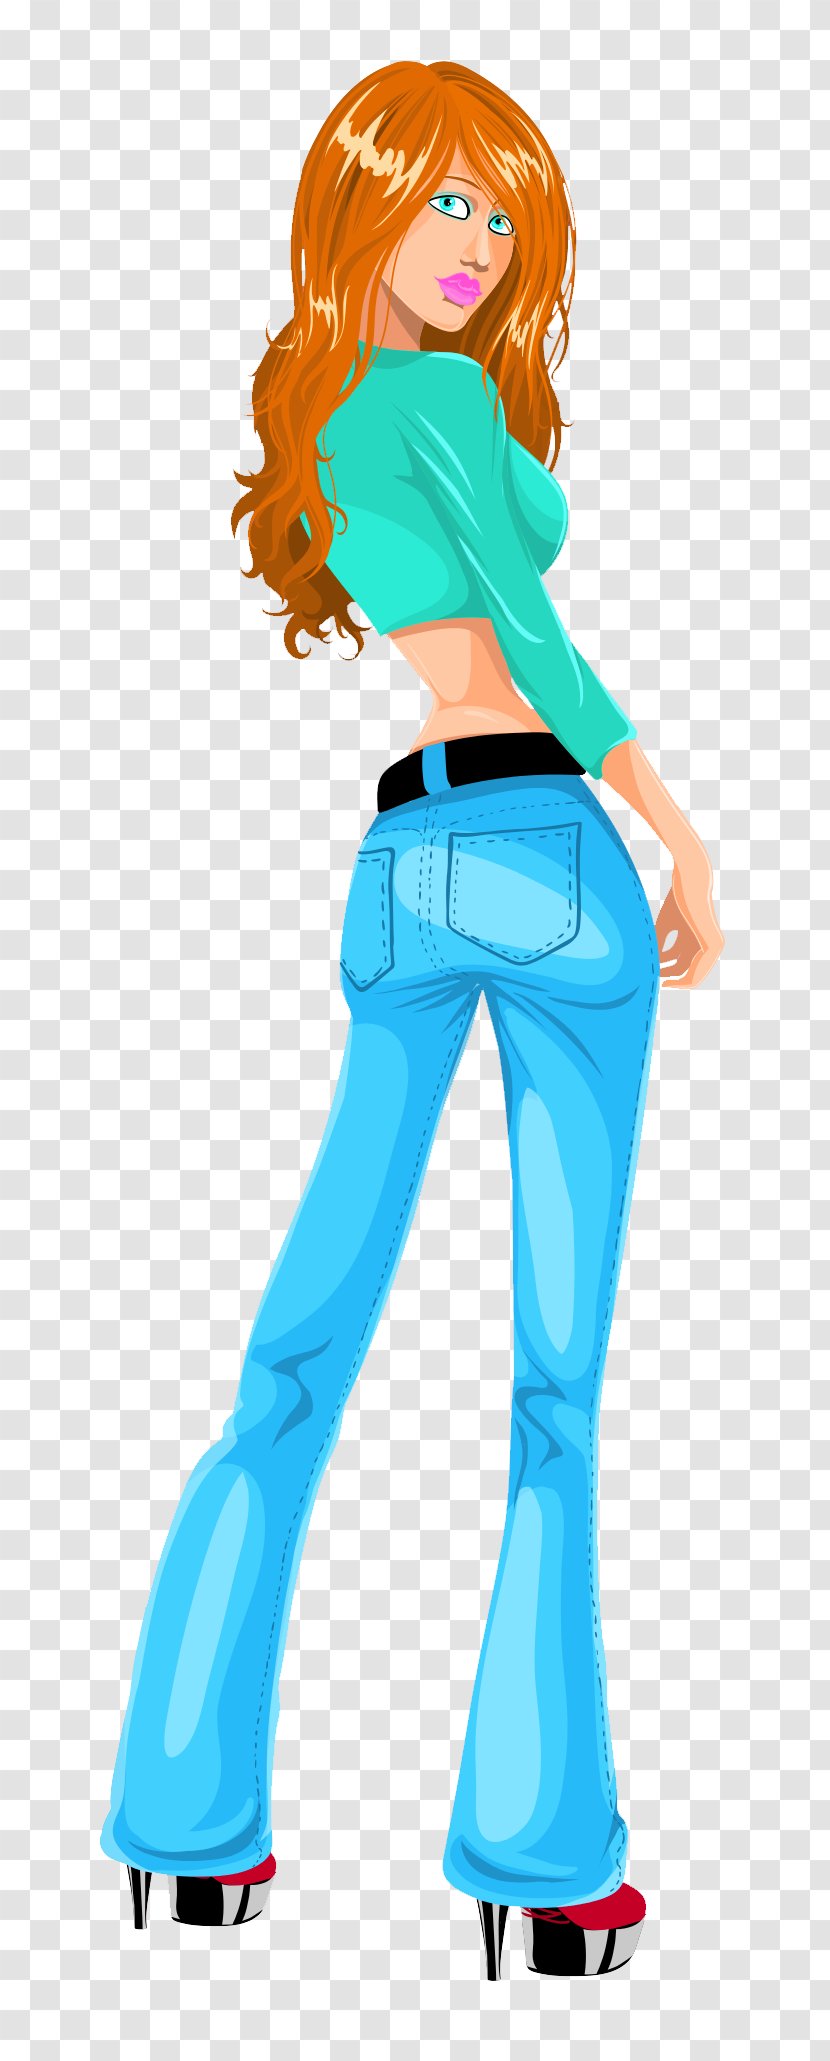 Clothing Standing Turquoise Aqua Cartoon - Waist - Jeans Trousers Transparent PNG